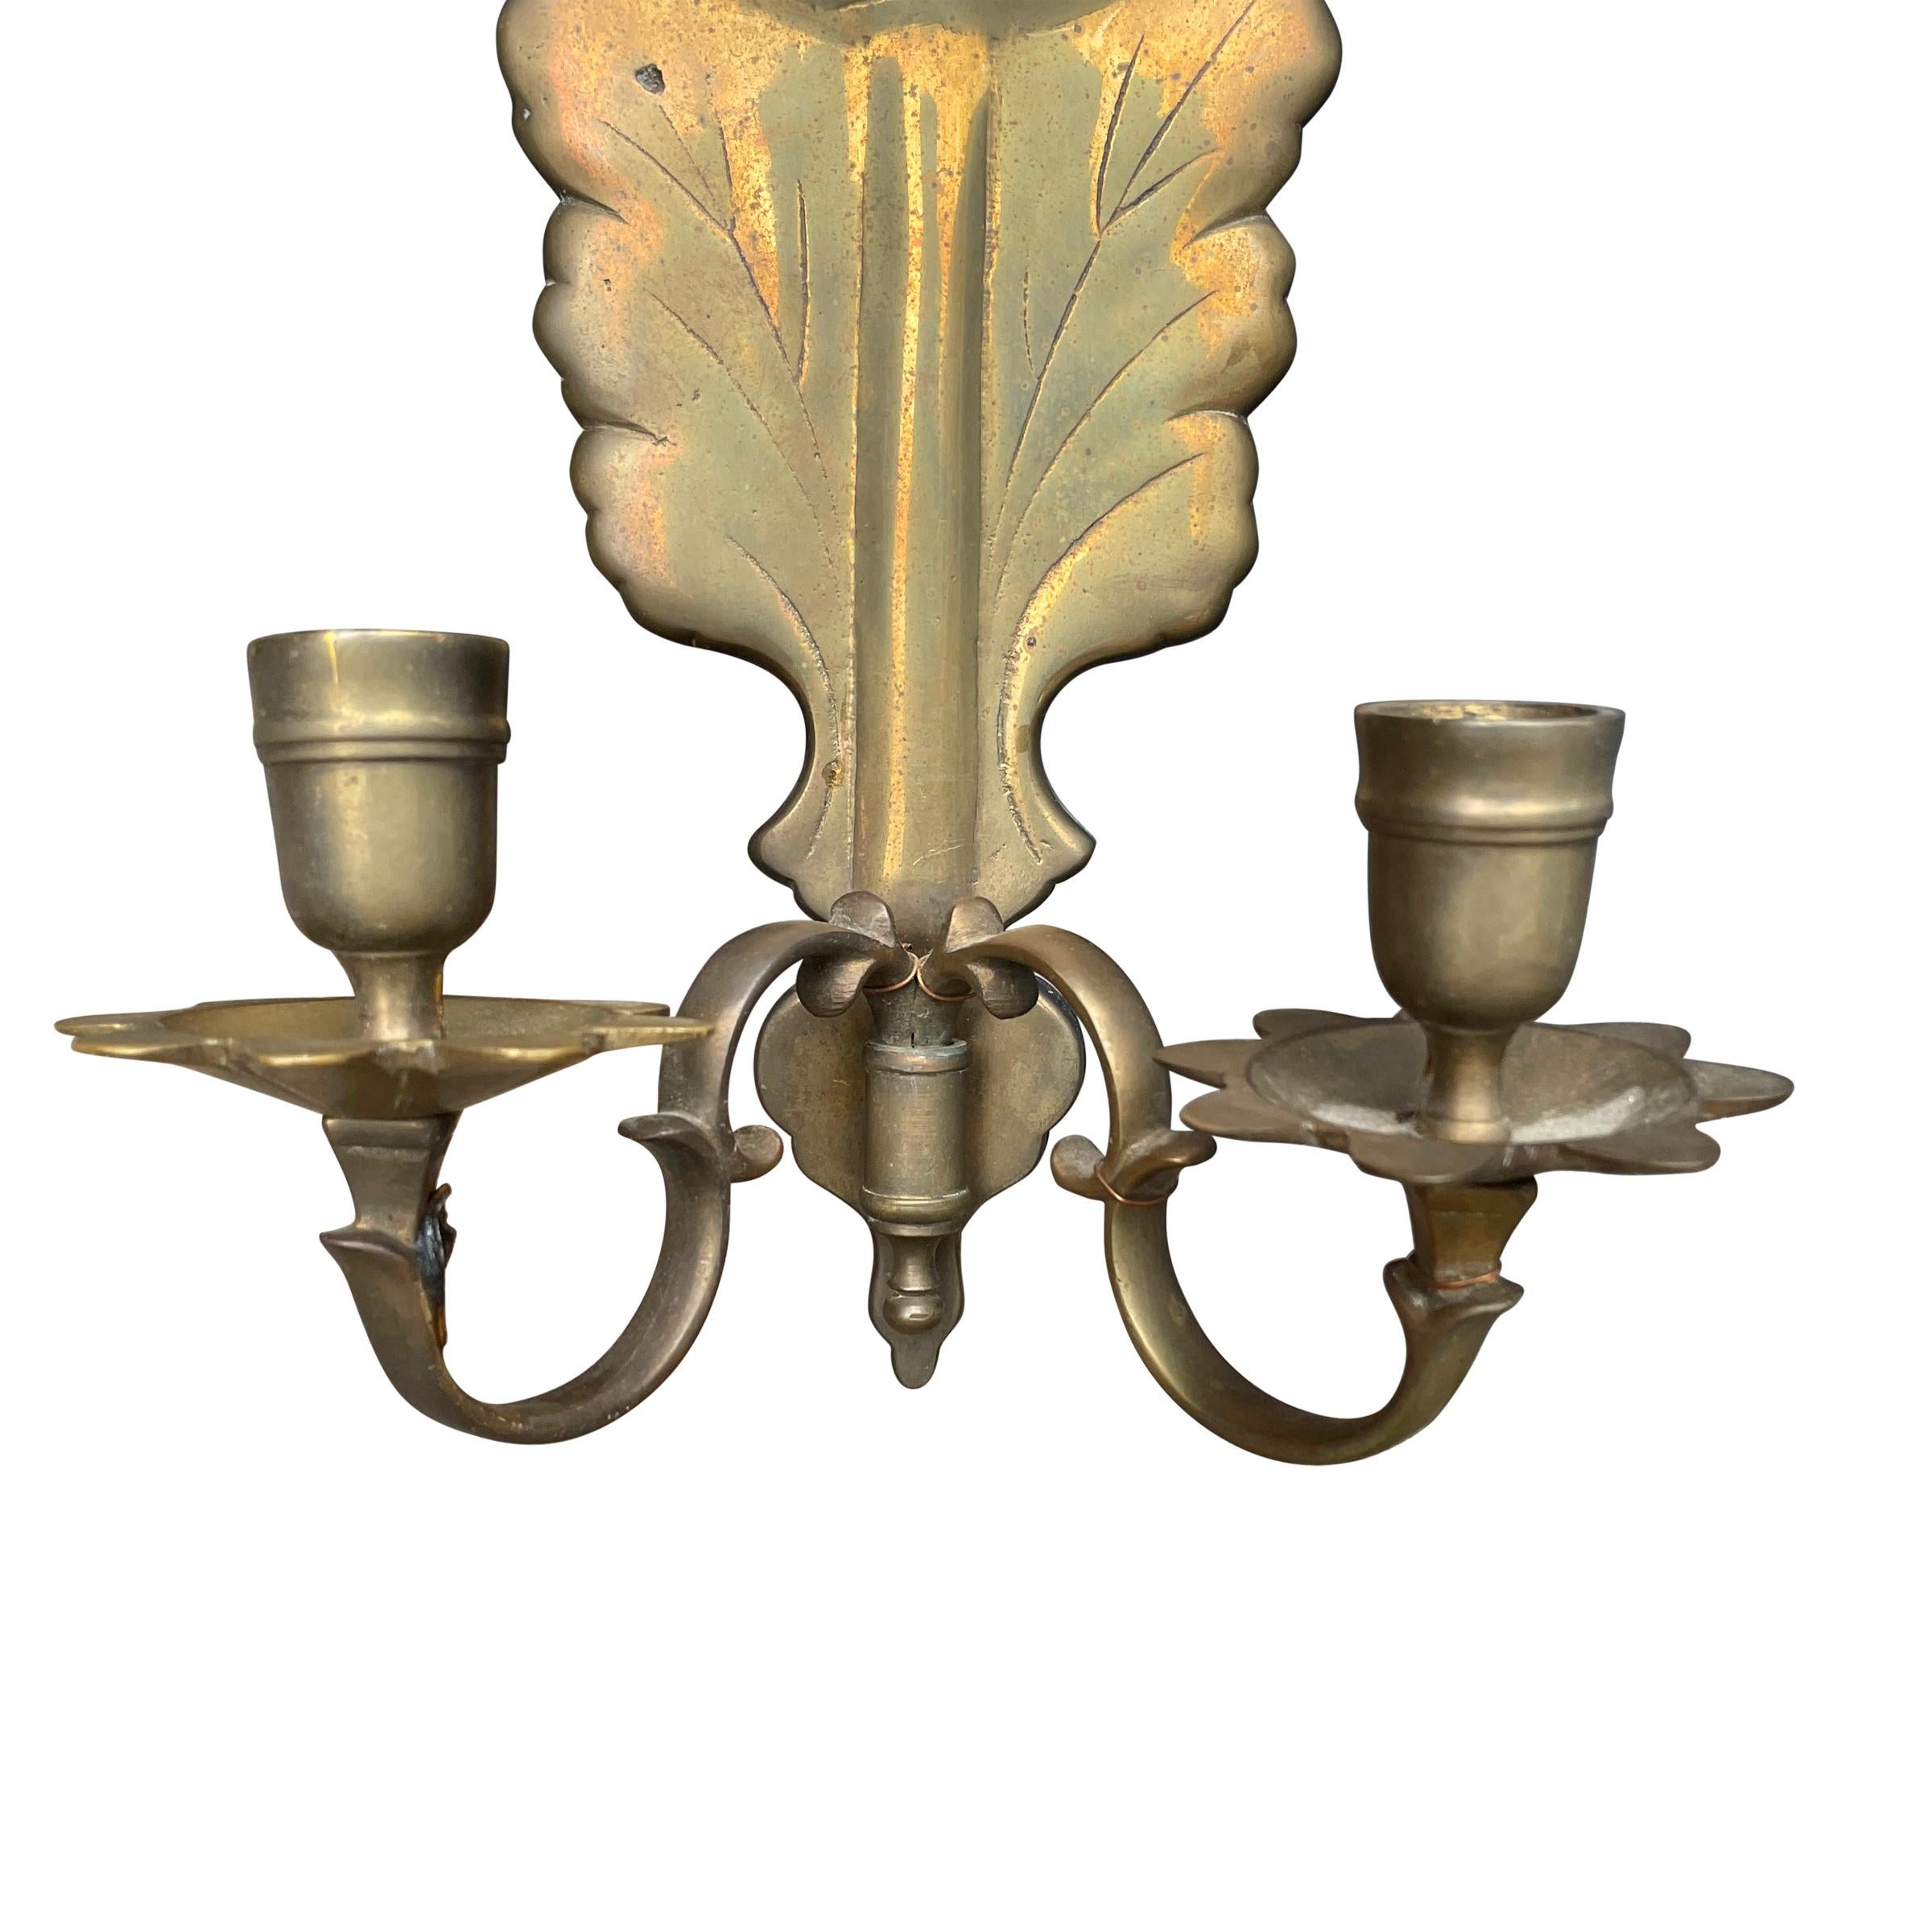 Pair of Vintage Mirrored Brass Acorn Candle Sconces 5